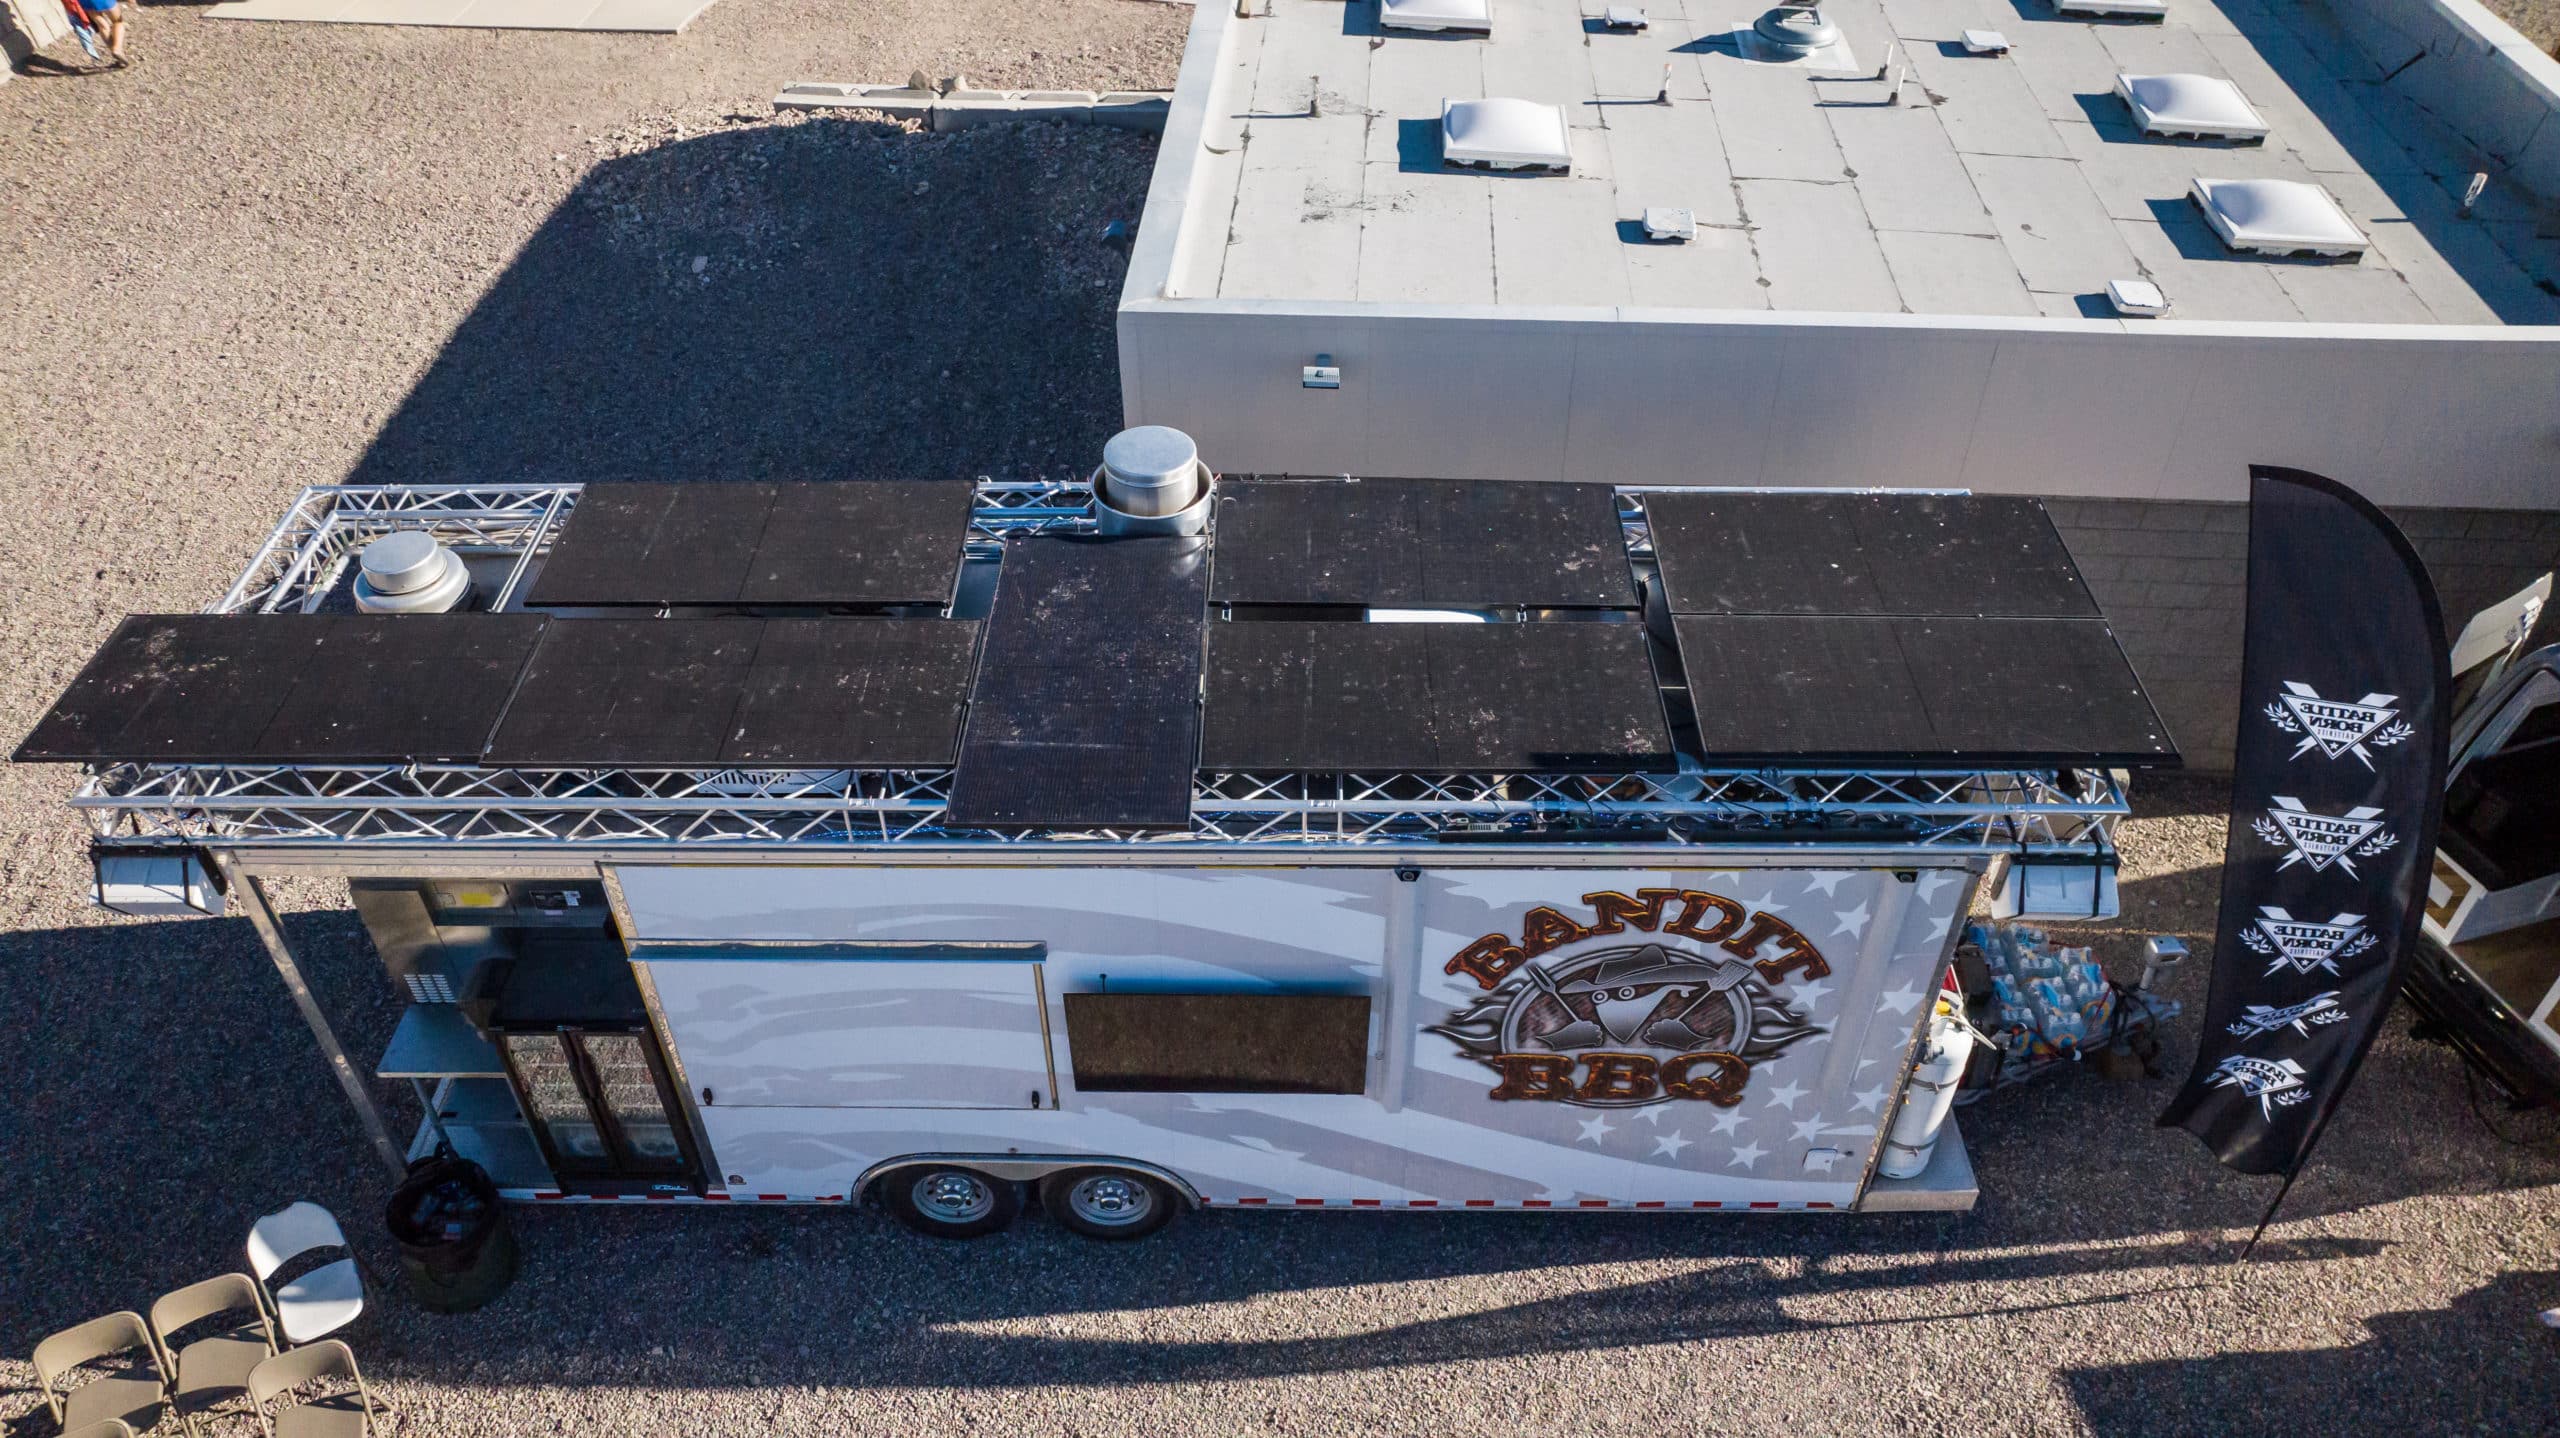 Areal View of the Bandit BBQ Food Truck